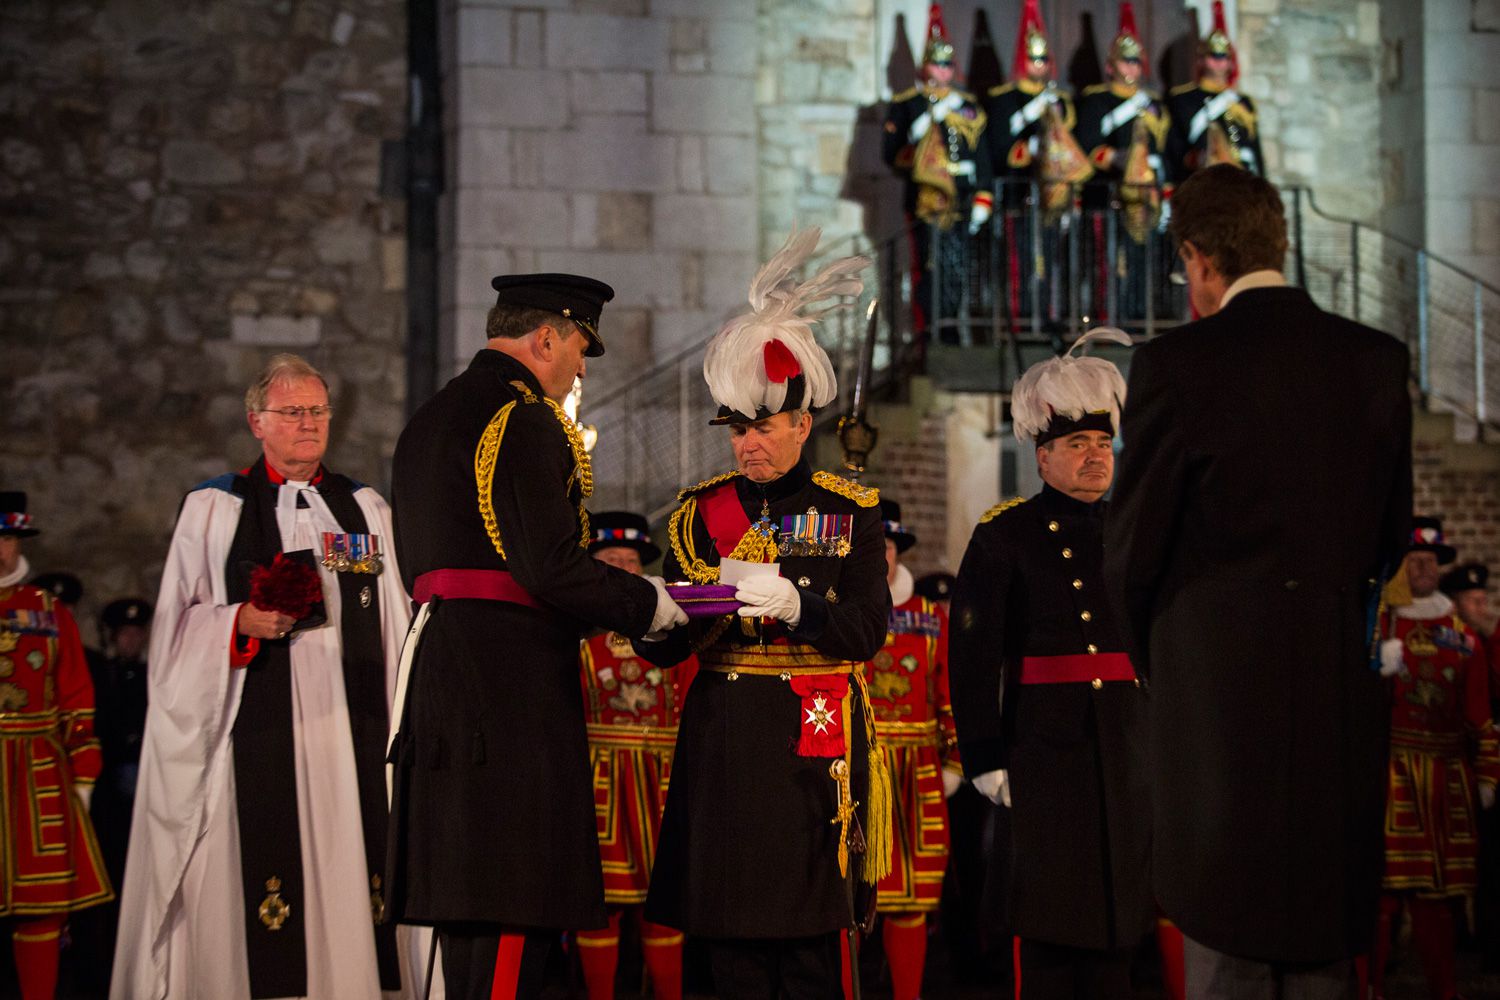 Ceremony of the Keys at Tower of London